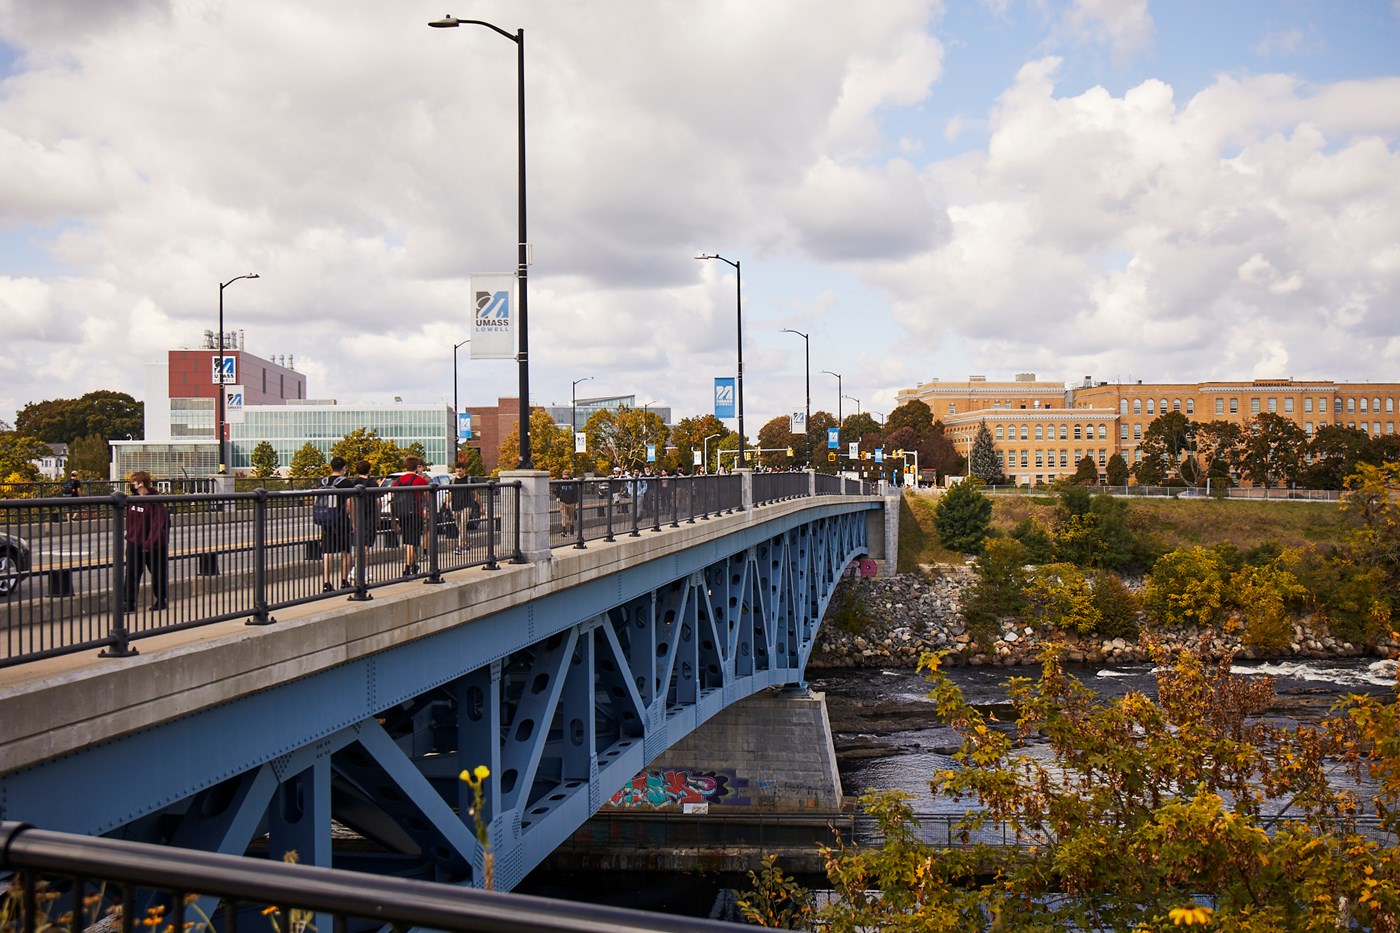 A bridge is shown from the side with a river flowing underneath. Several students are shown walking across the bridge. The bridge also features several white and blue UMass Lowell banners. Several UMass Lowell buildings are shown in the background